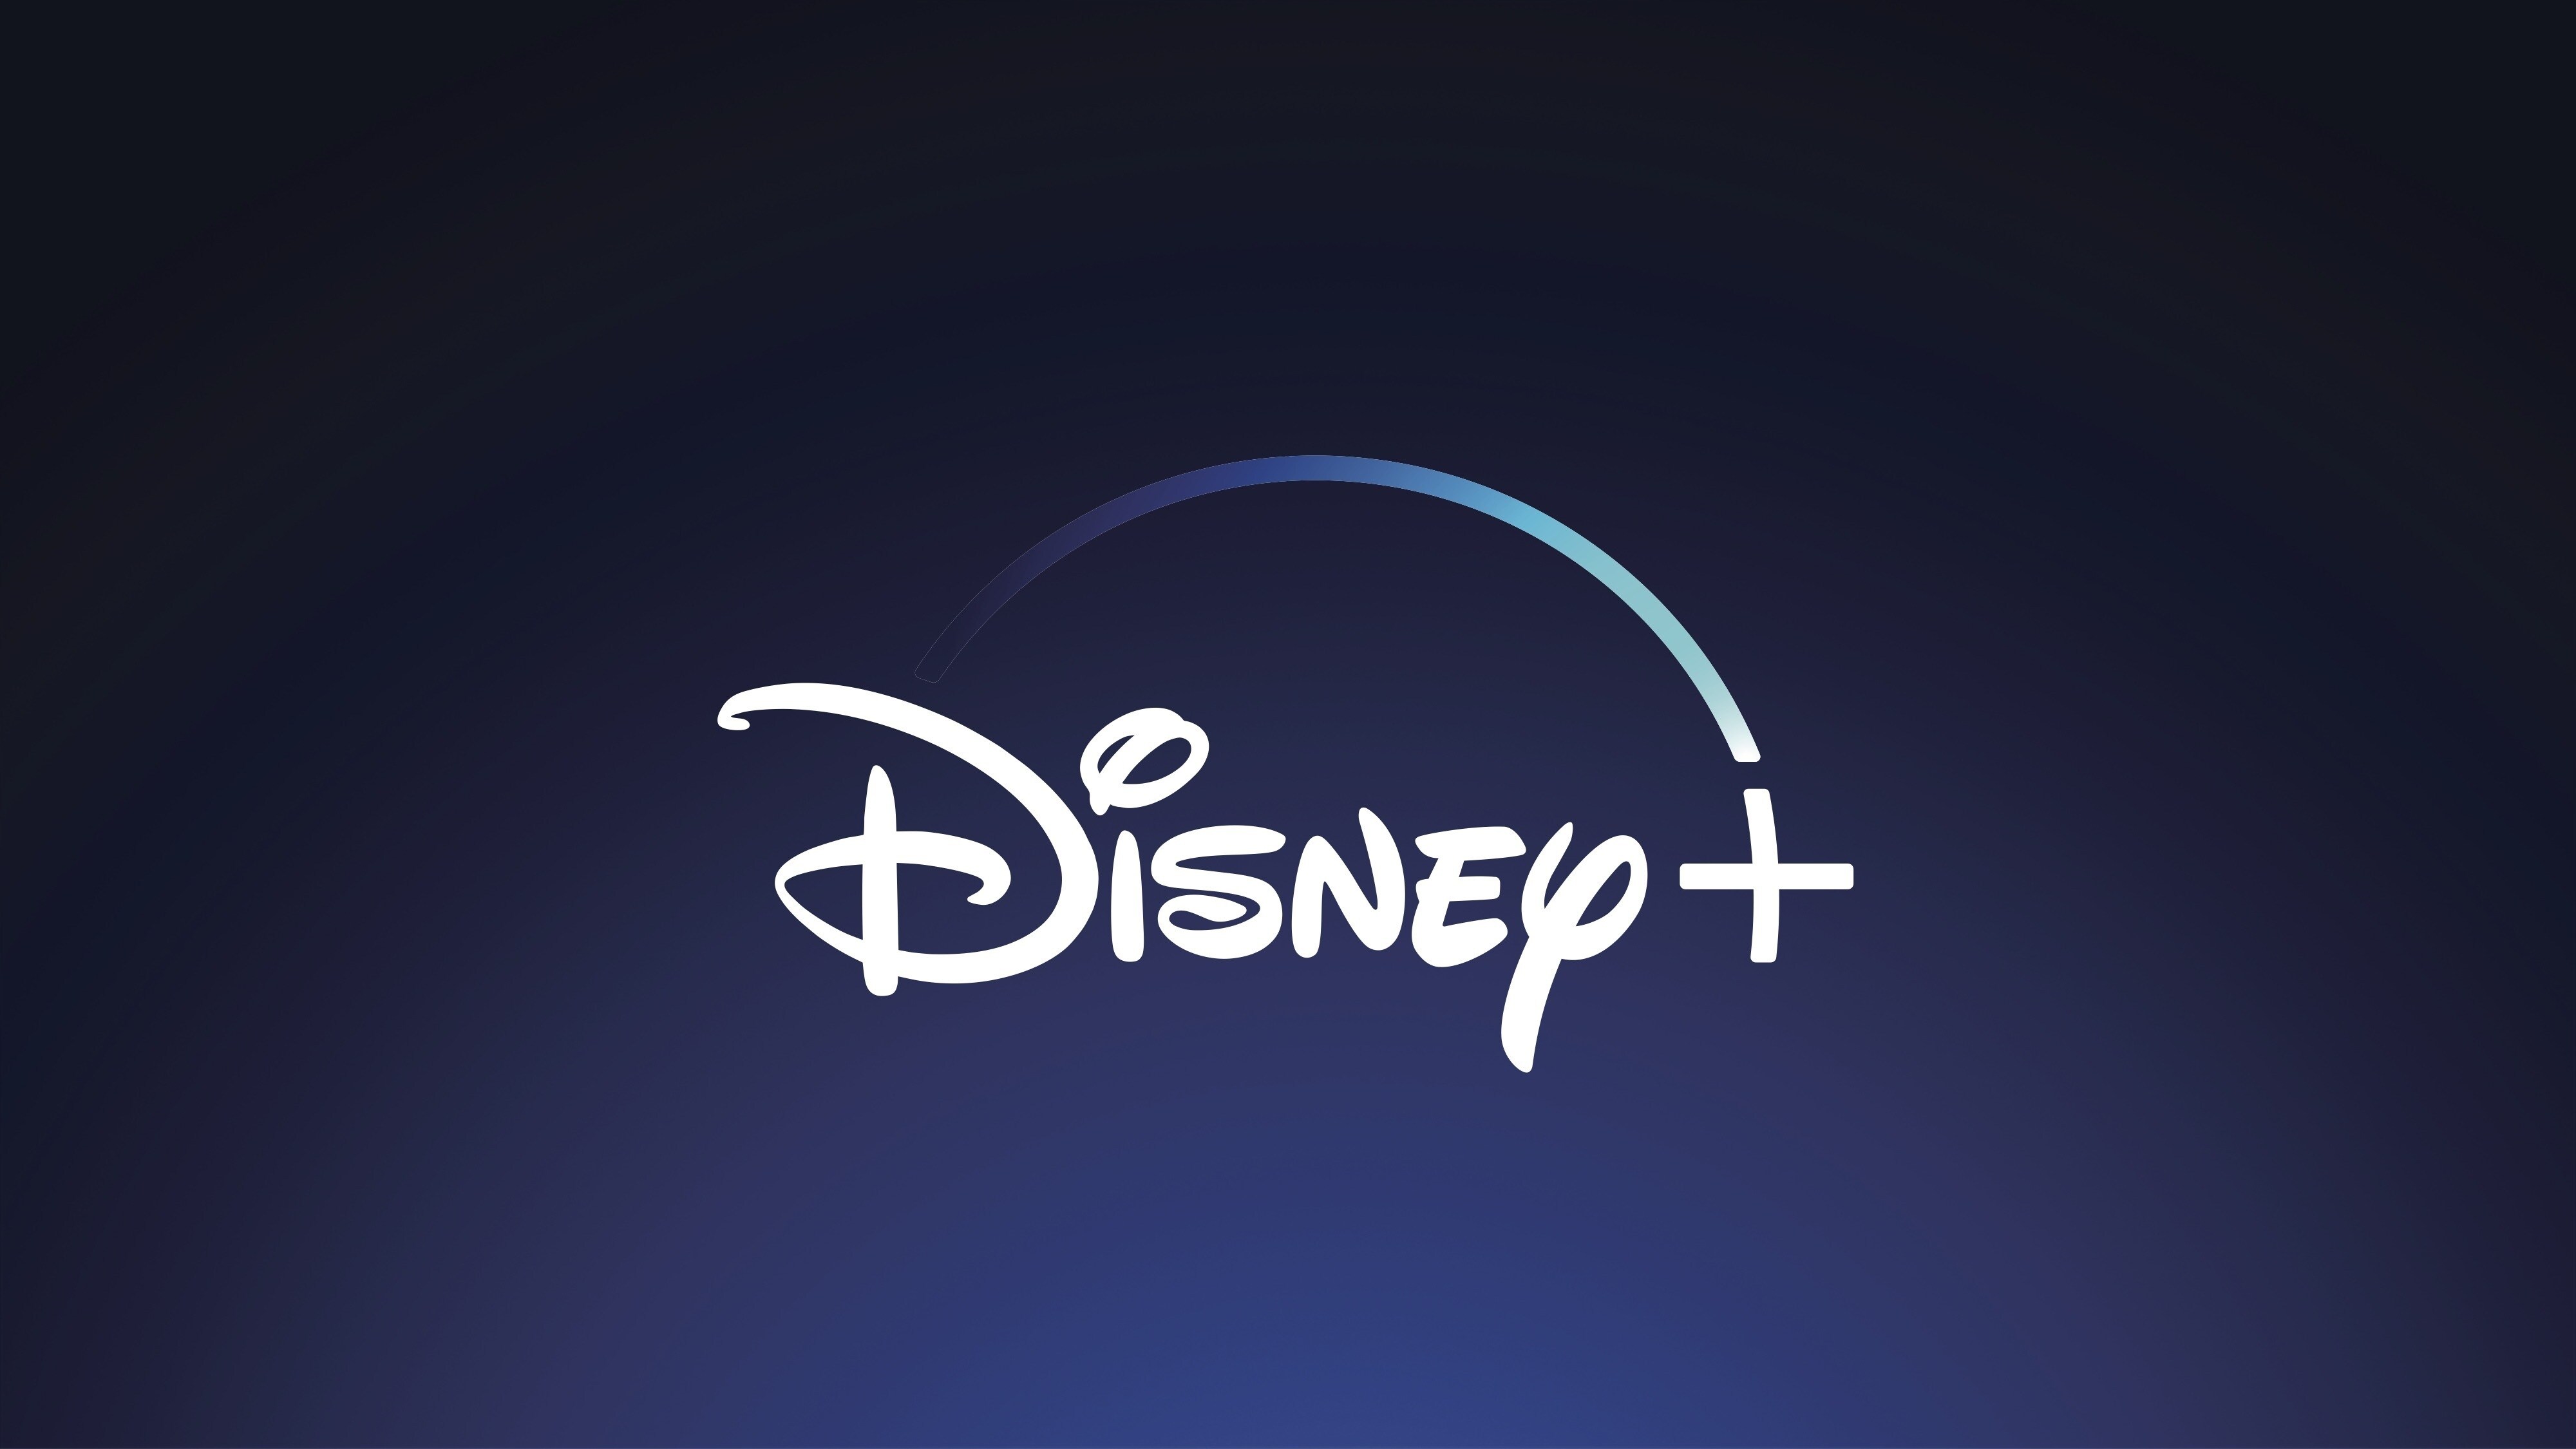 Season’s streamings from Disney+ celebrate the most wonderful time of the year with joyful collection of movies, specials, and themed episodes